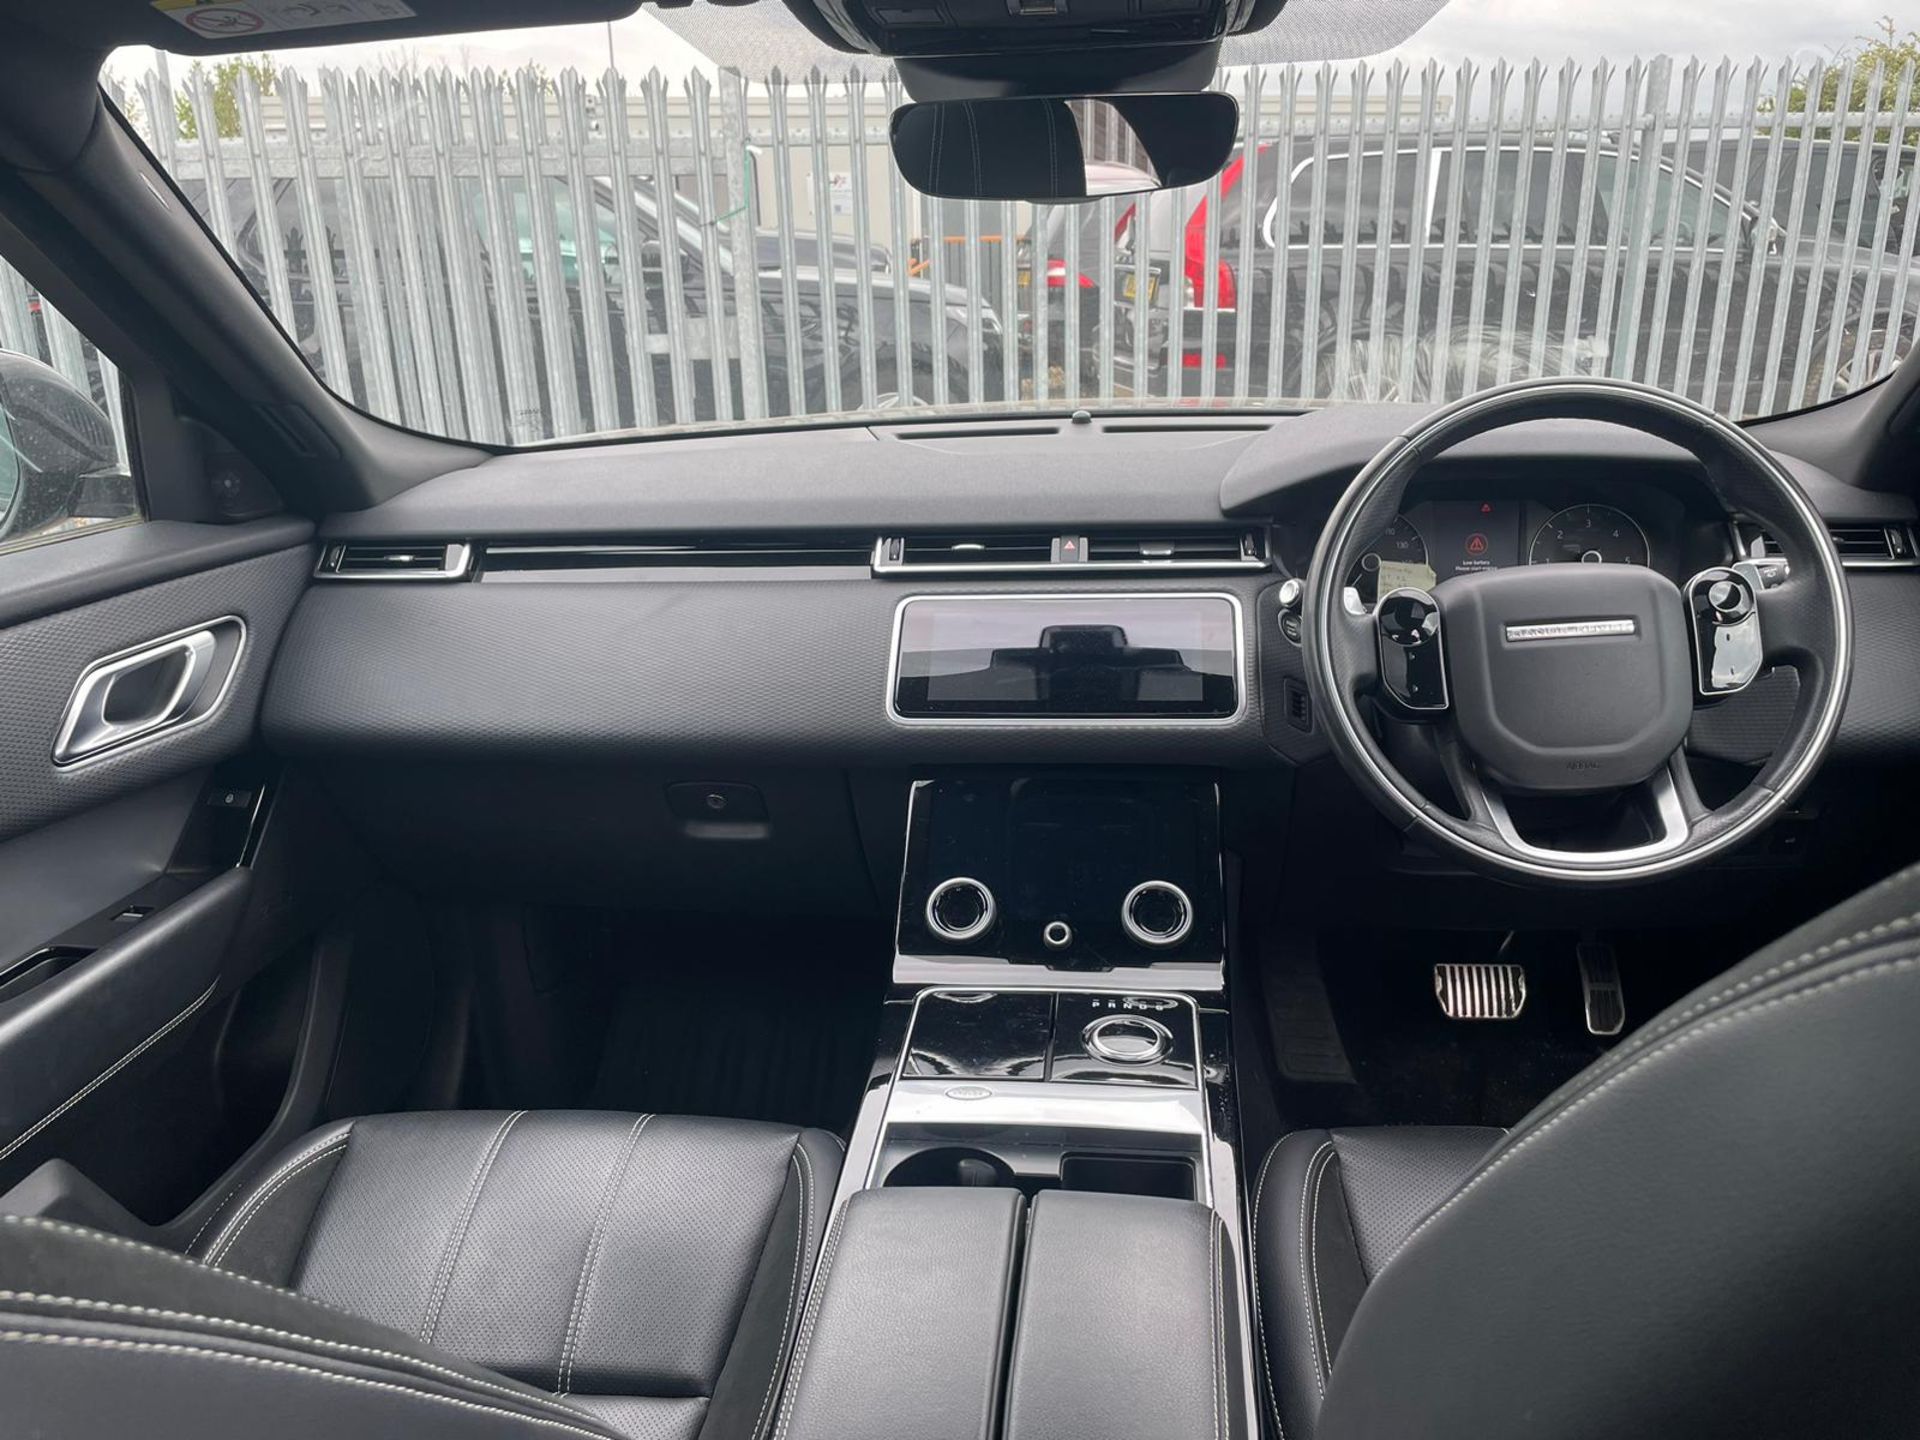 Land Rover Range Rover Velar 2.0 D240 R-Dynamic S 2018 '18 Reg' 4WD - Panoramic Roof- ULEZ Compliant - Image 18 of 33